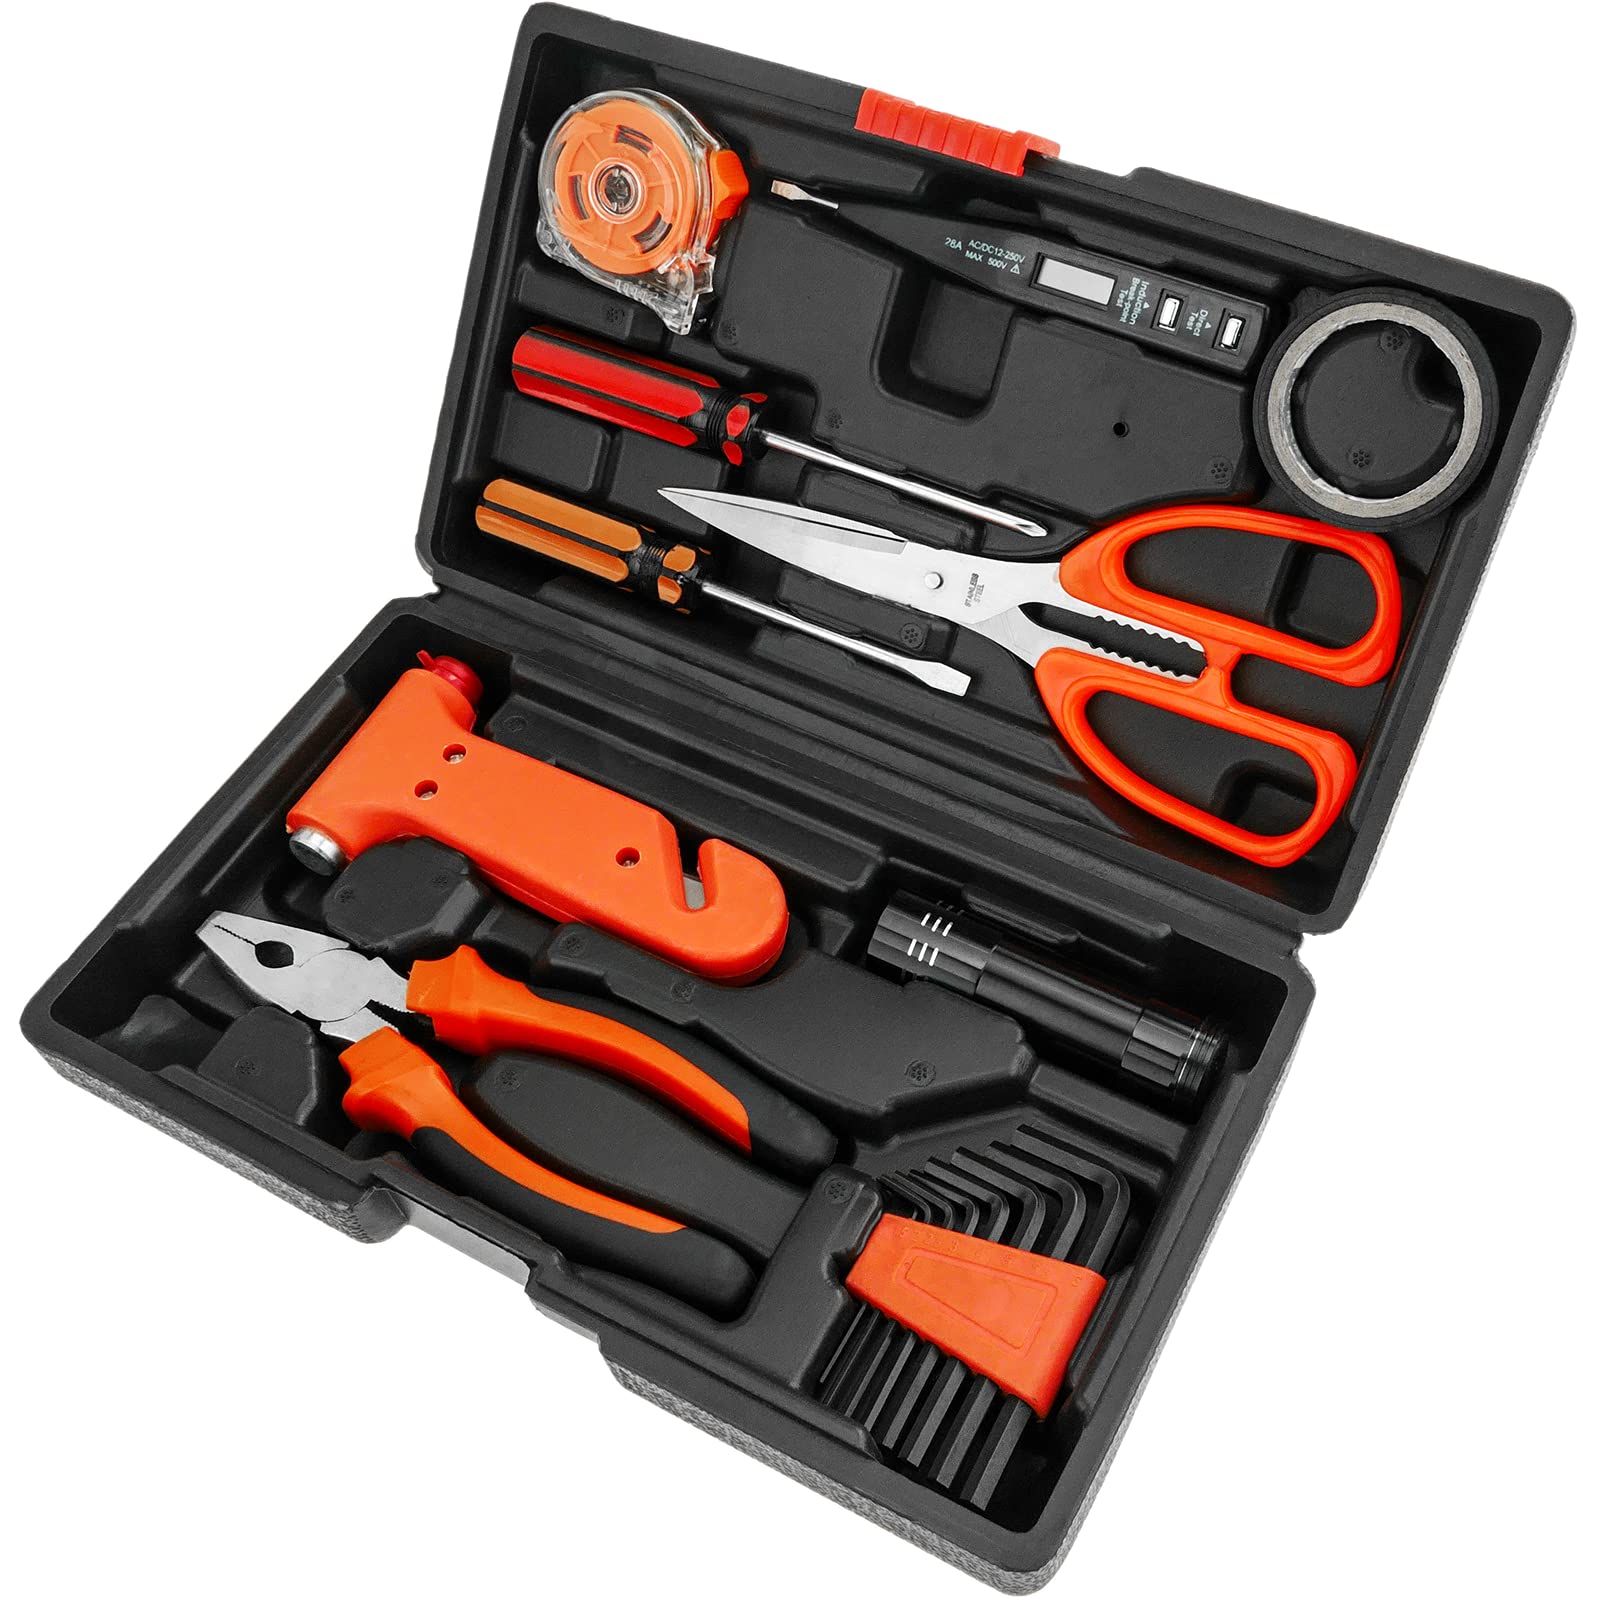 Basic toolkit with screwdriver and wrench